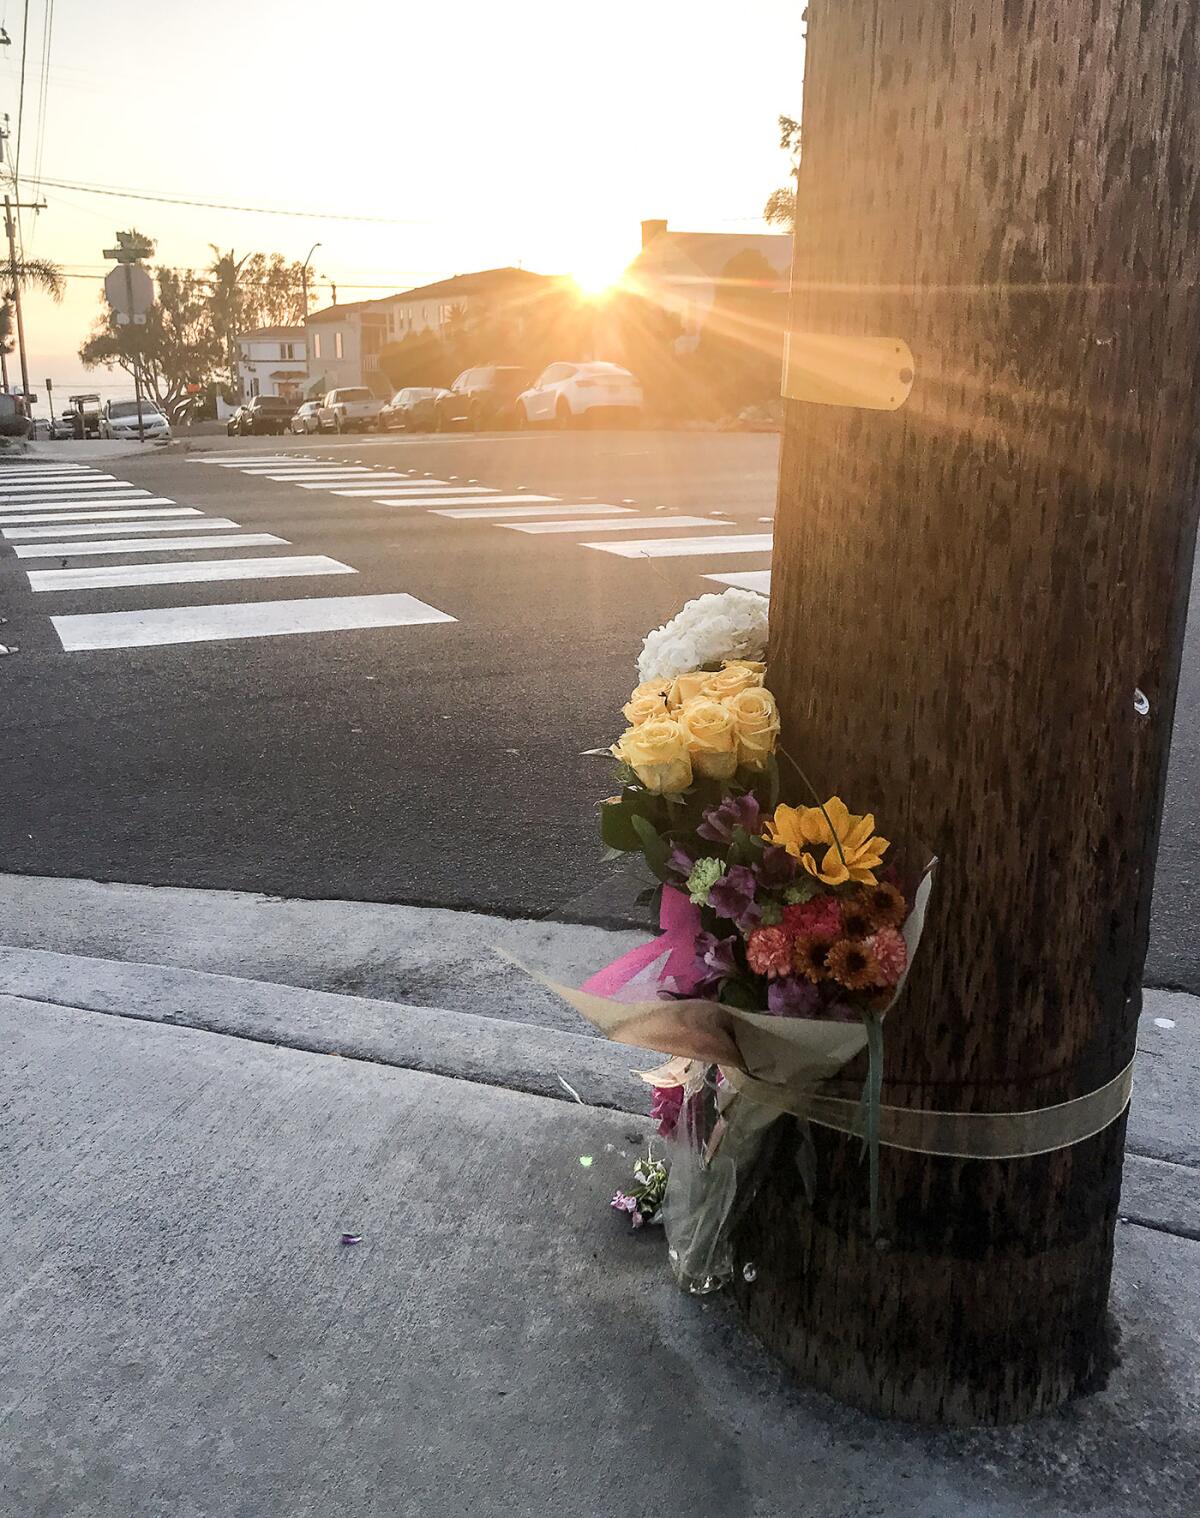 Flowers were left at the corner of Oak Street and Glenneyre Street.